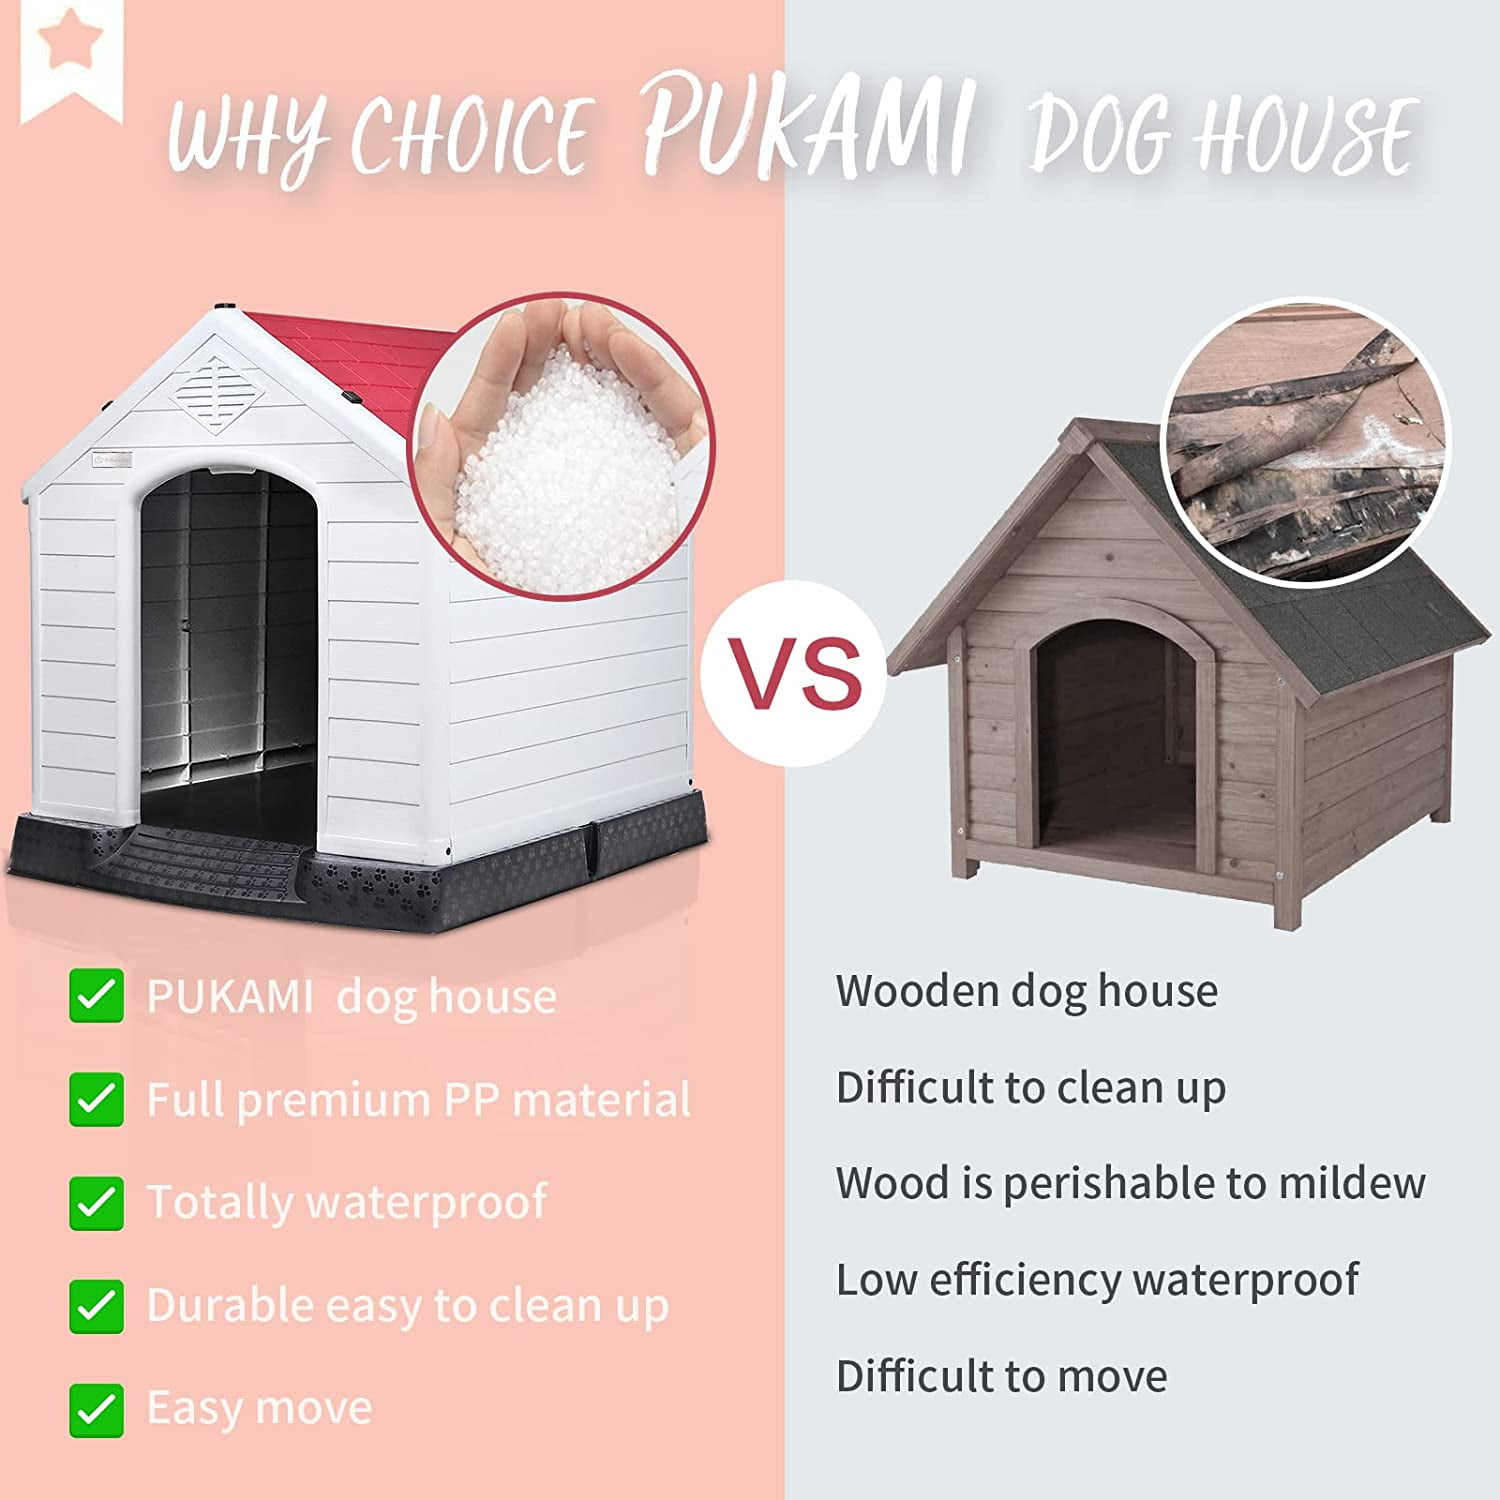 34inch, Grey PUKAMI Plastic Dog House Outdoor Indoor,Durable Dog House for Small Medium Large Dogs,Waterproof Dog Houses with Elevated Floor and Air Vents,Ventilate & Easy Clean and Assemble 